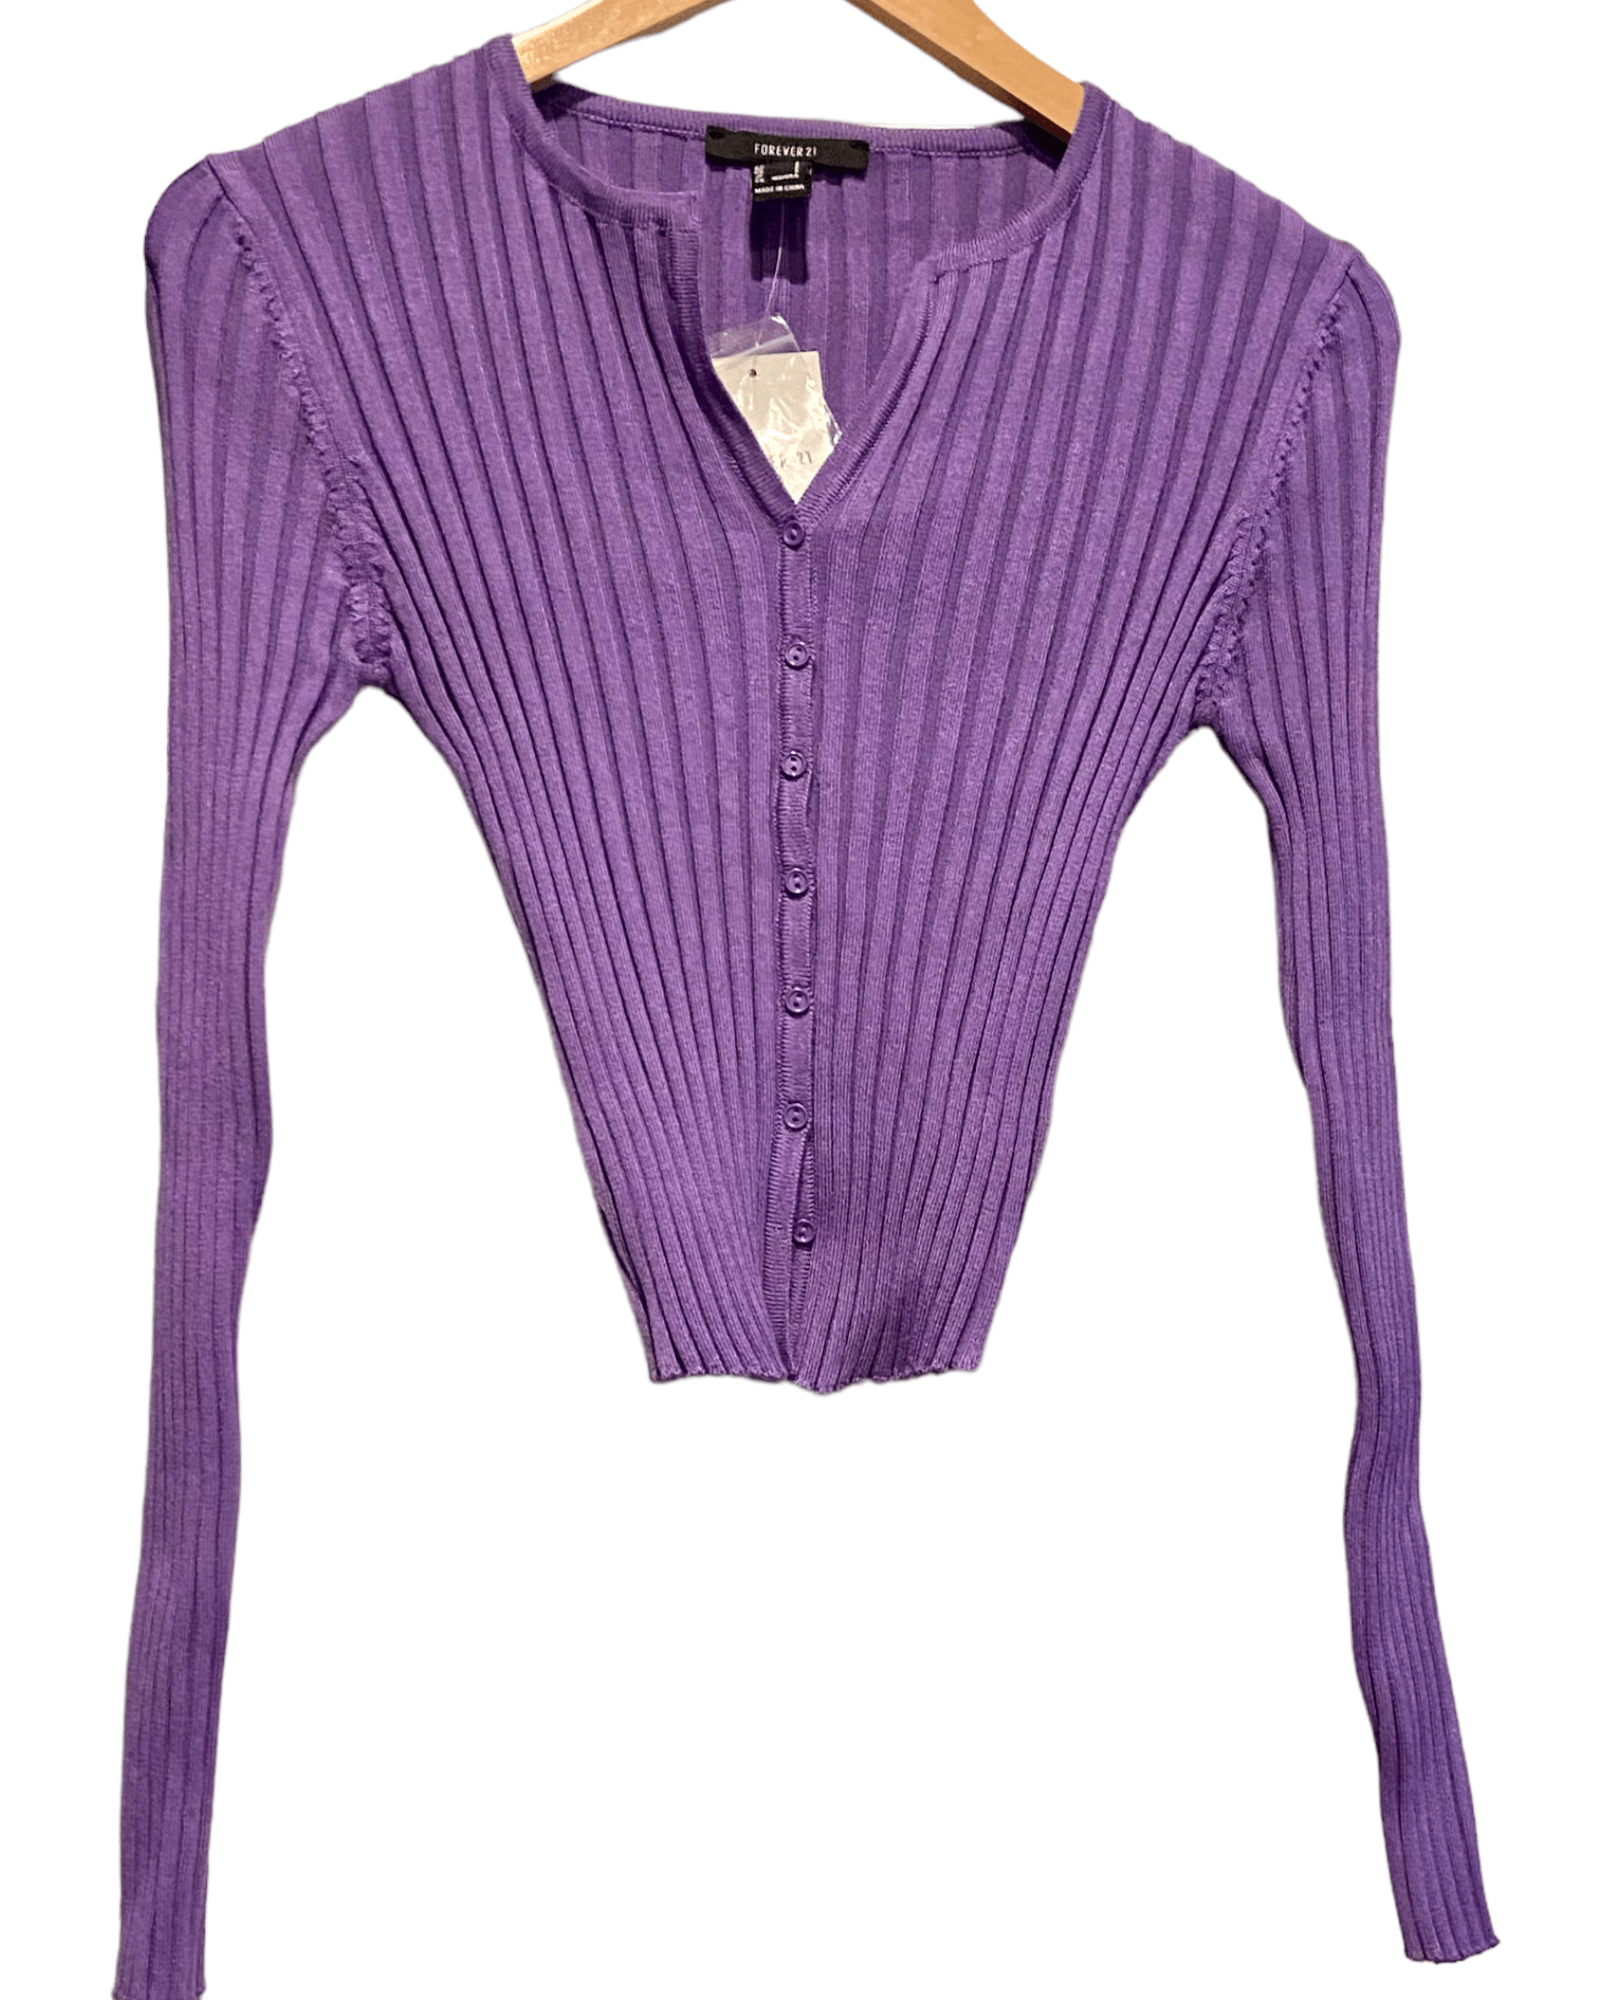 Cool Summer FOREVER 21 lilac purple ribbed sweater cardigan